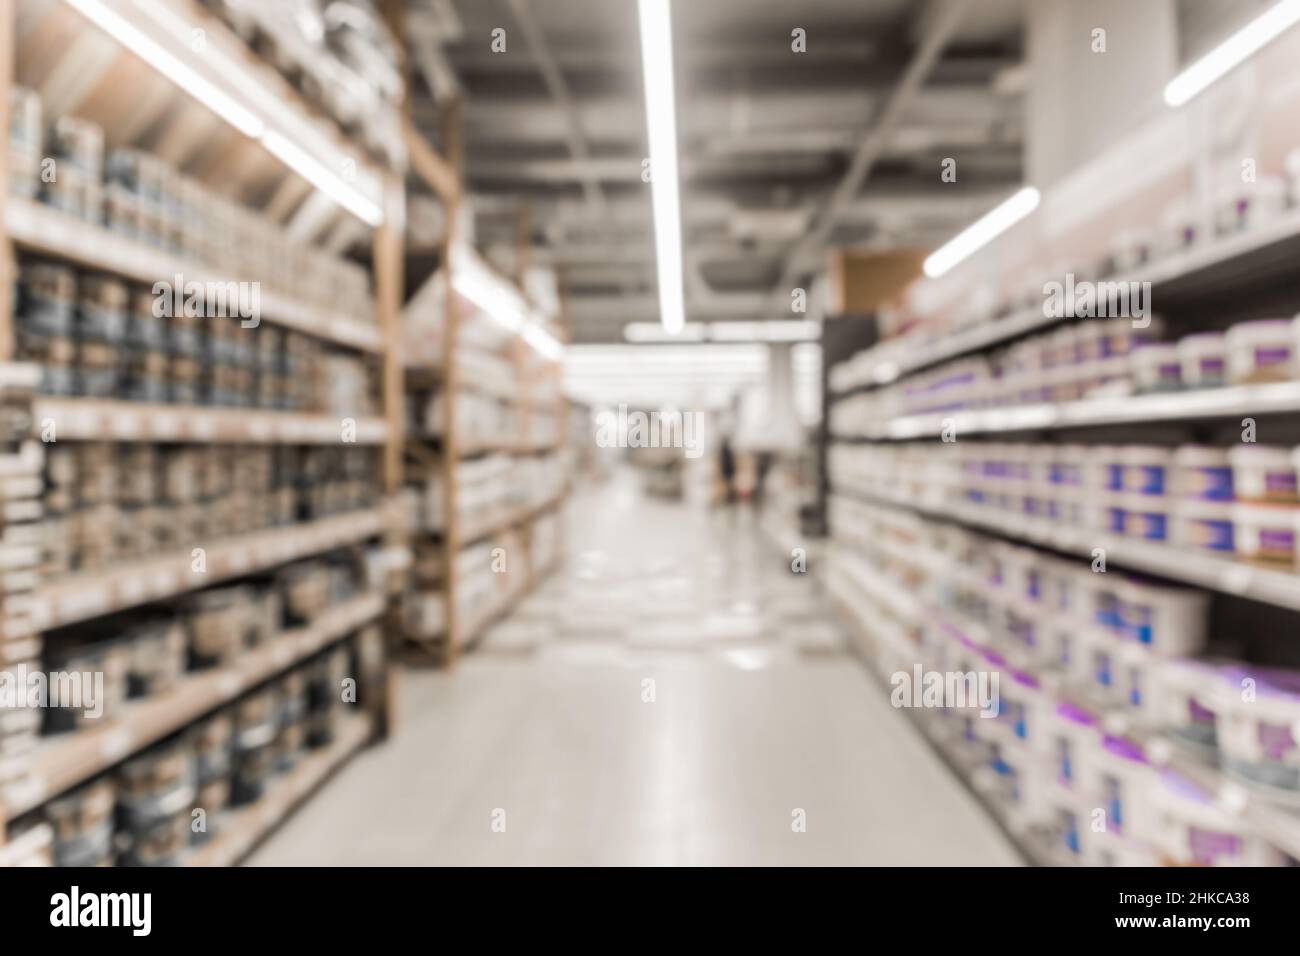 Blurry background of a hardware store with shelves and materials for interior and home design. Stock Photo